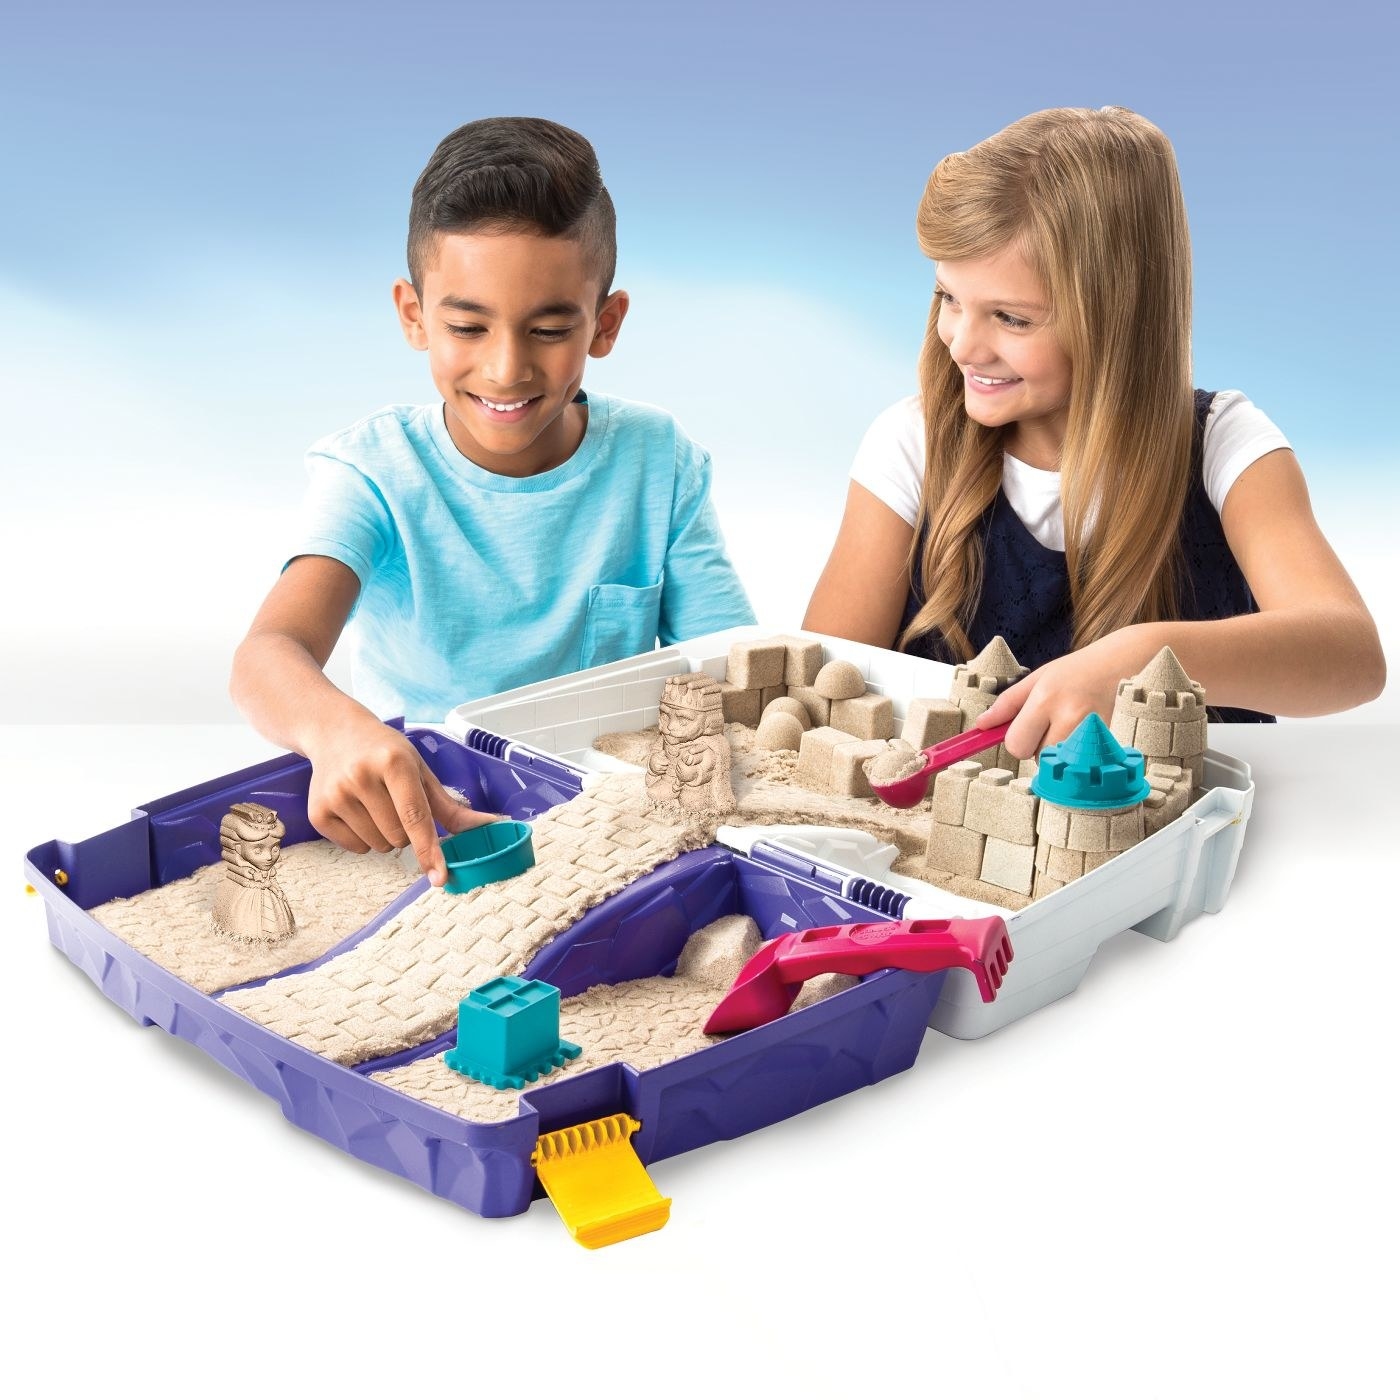 Two children playing with kinetic sand kit